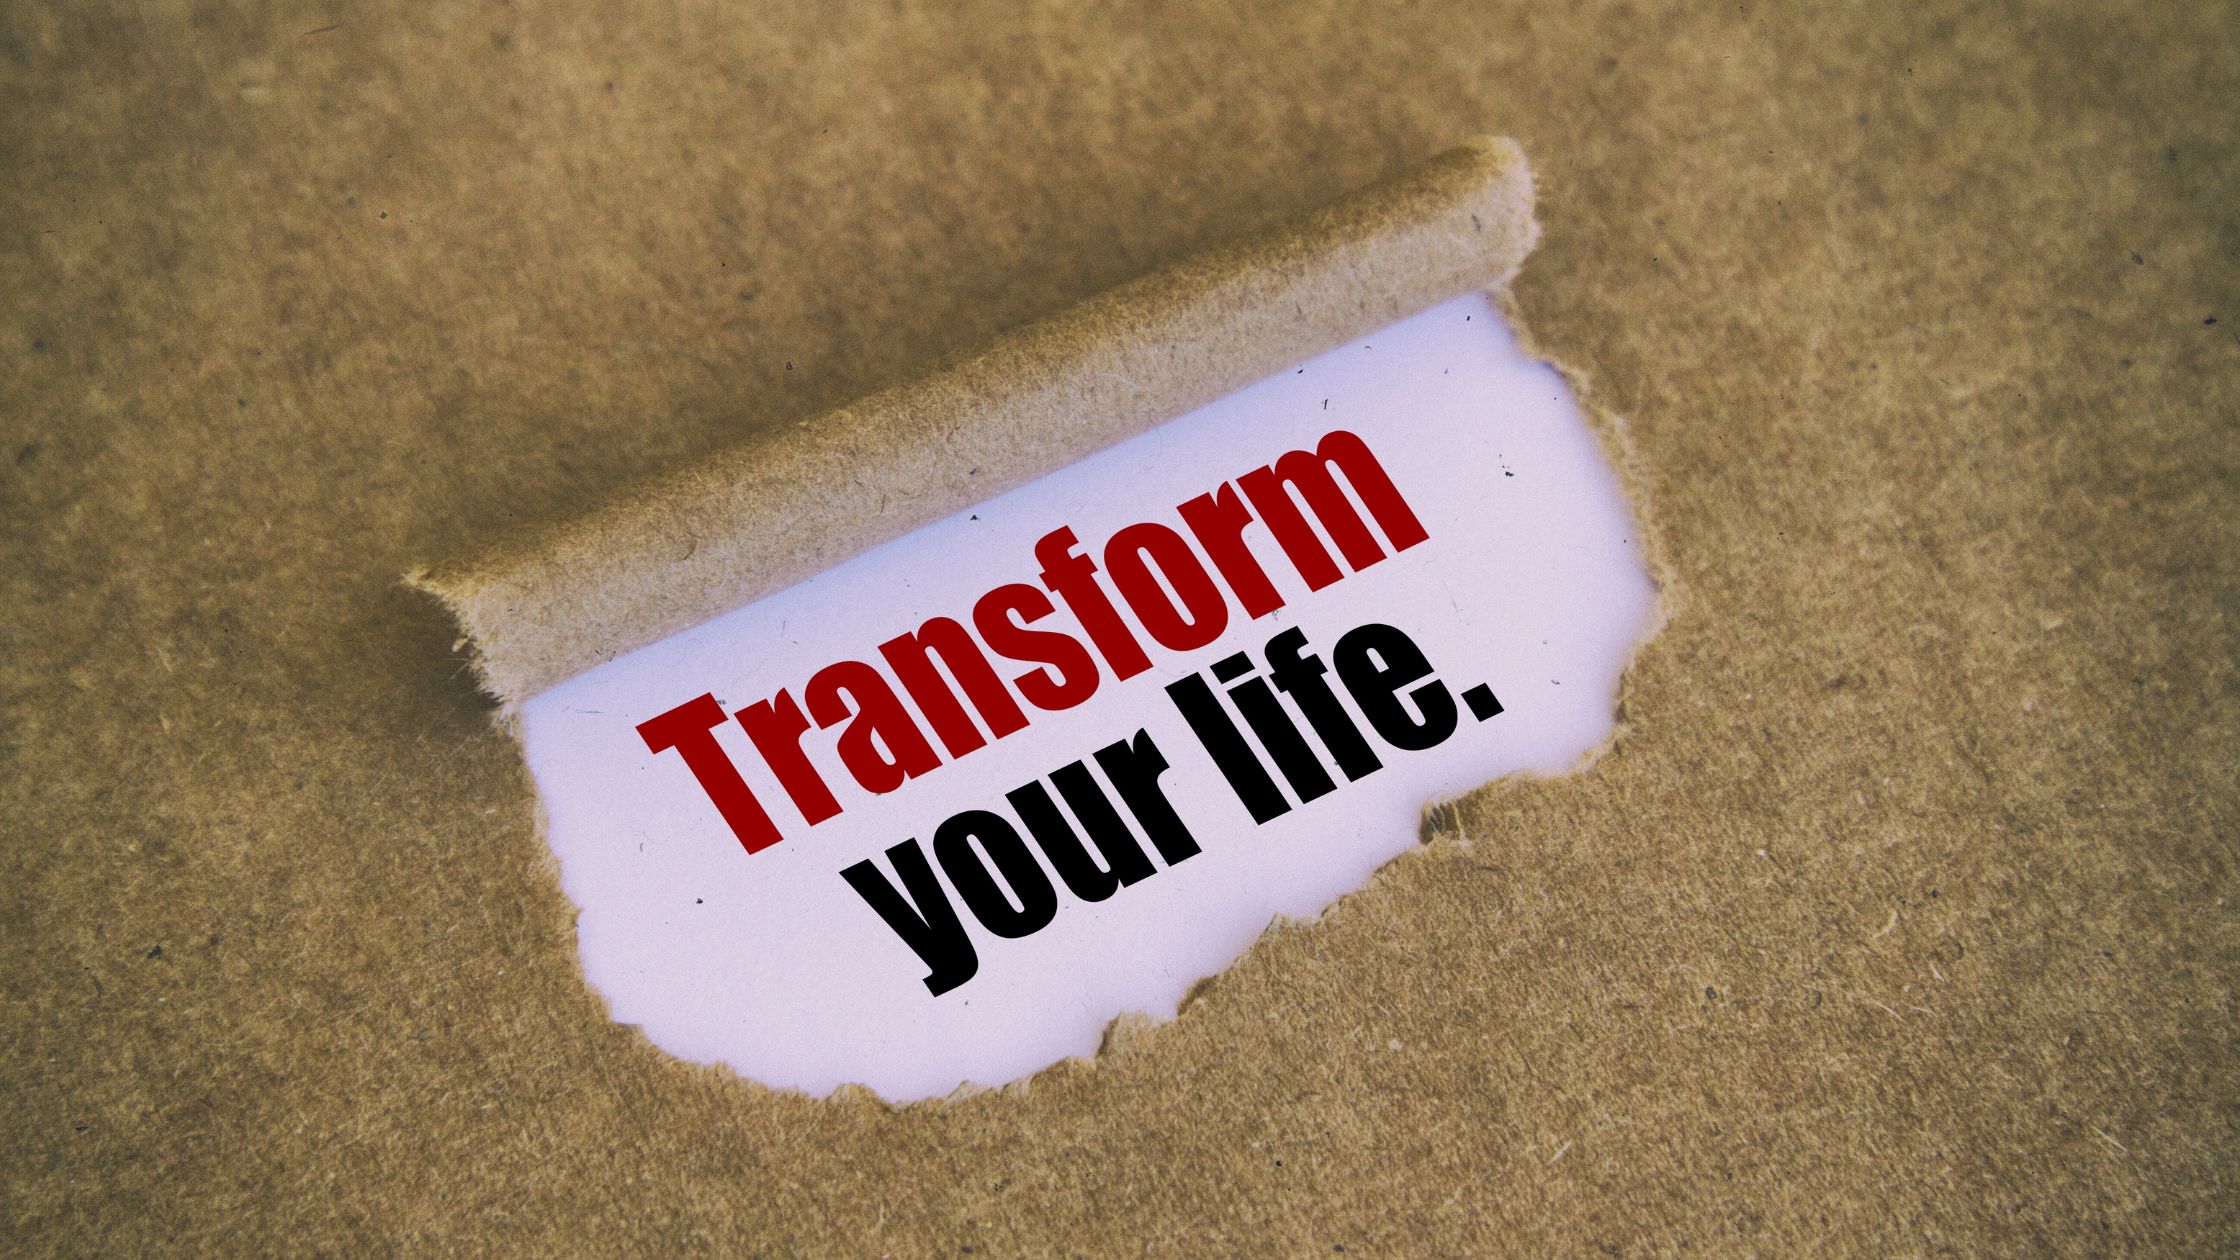 Embracing a Systematic Approach to Transform Your Life